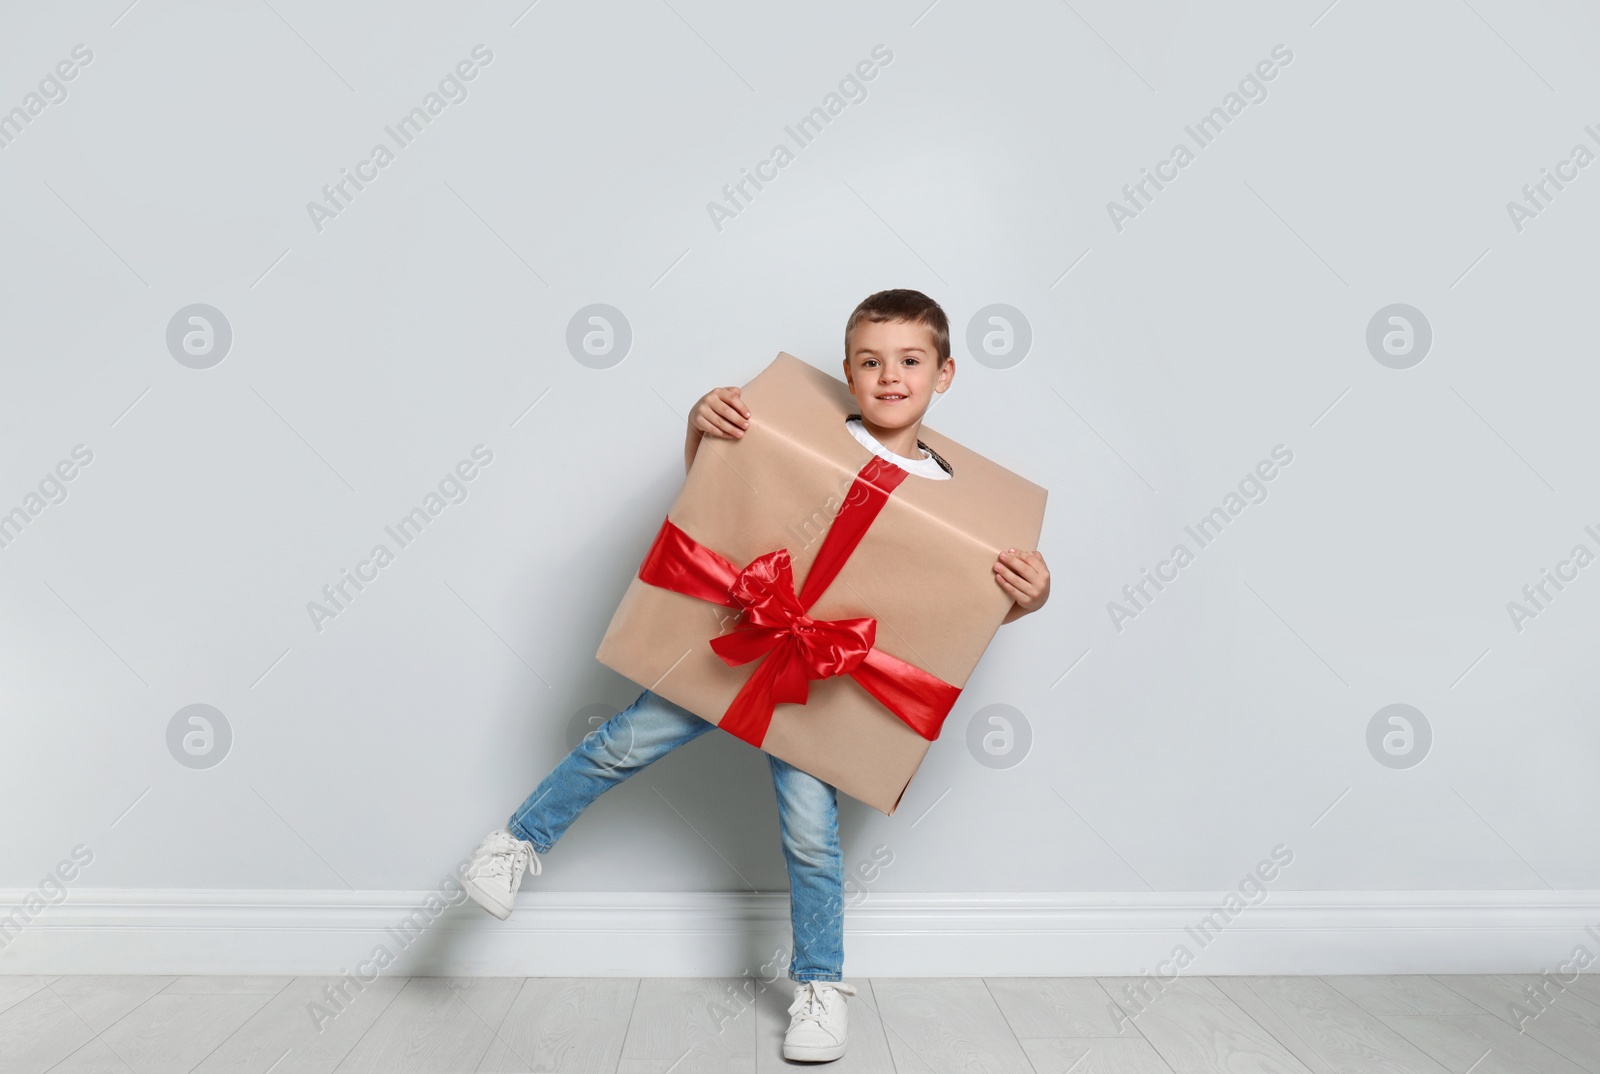 Image of Cute little boy dressed as gift box near white wall. Christmas suit